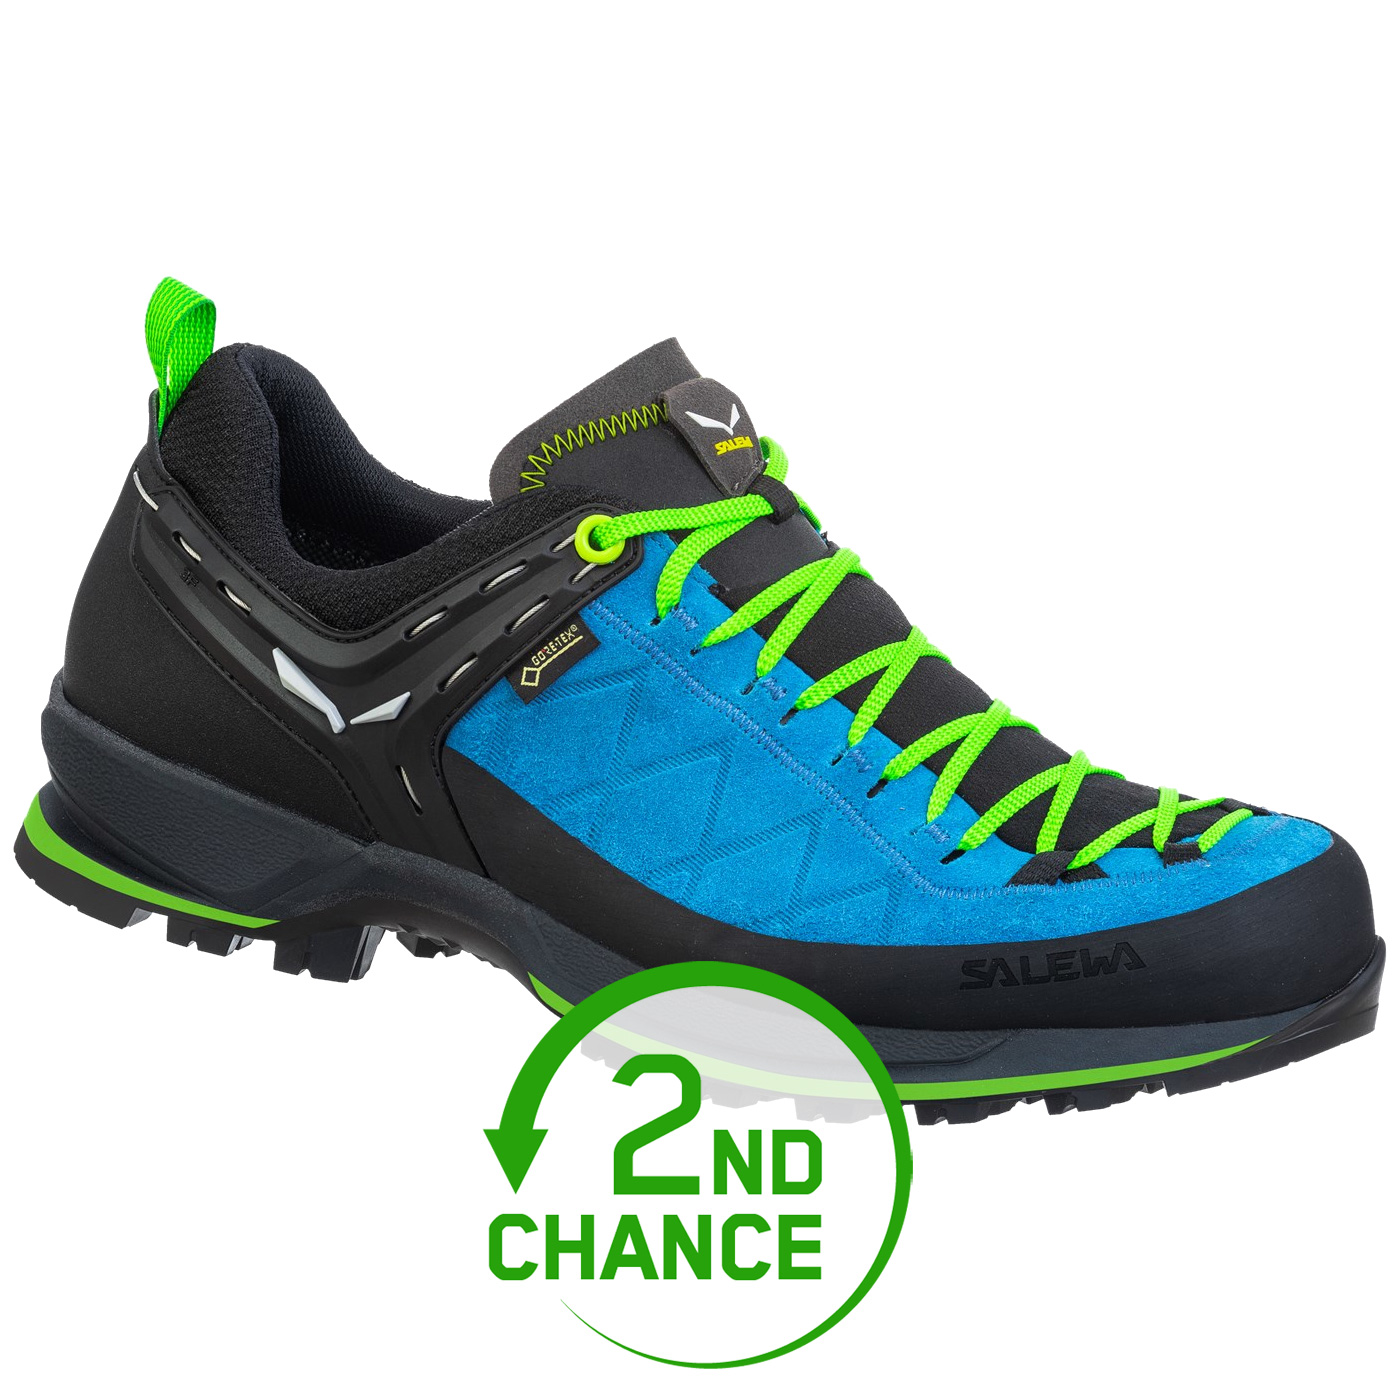 Picture of Salewa Mountain Trainer 2 GTX Hiking Shoes Men - blue danube/fluo green 8375 - 2nd Choice